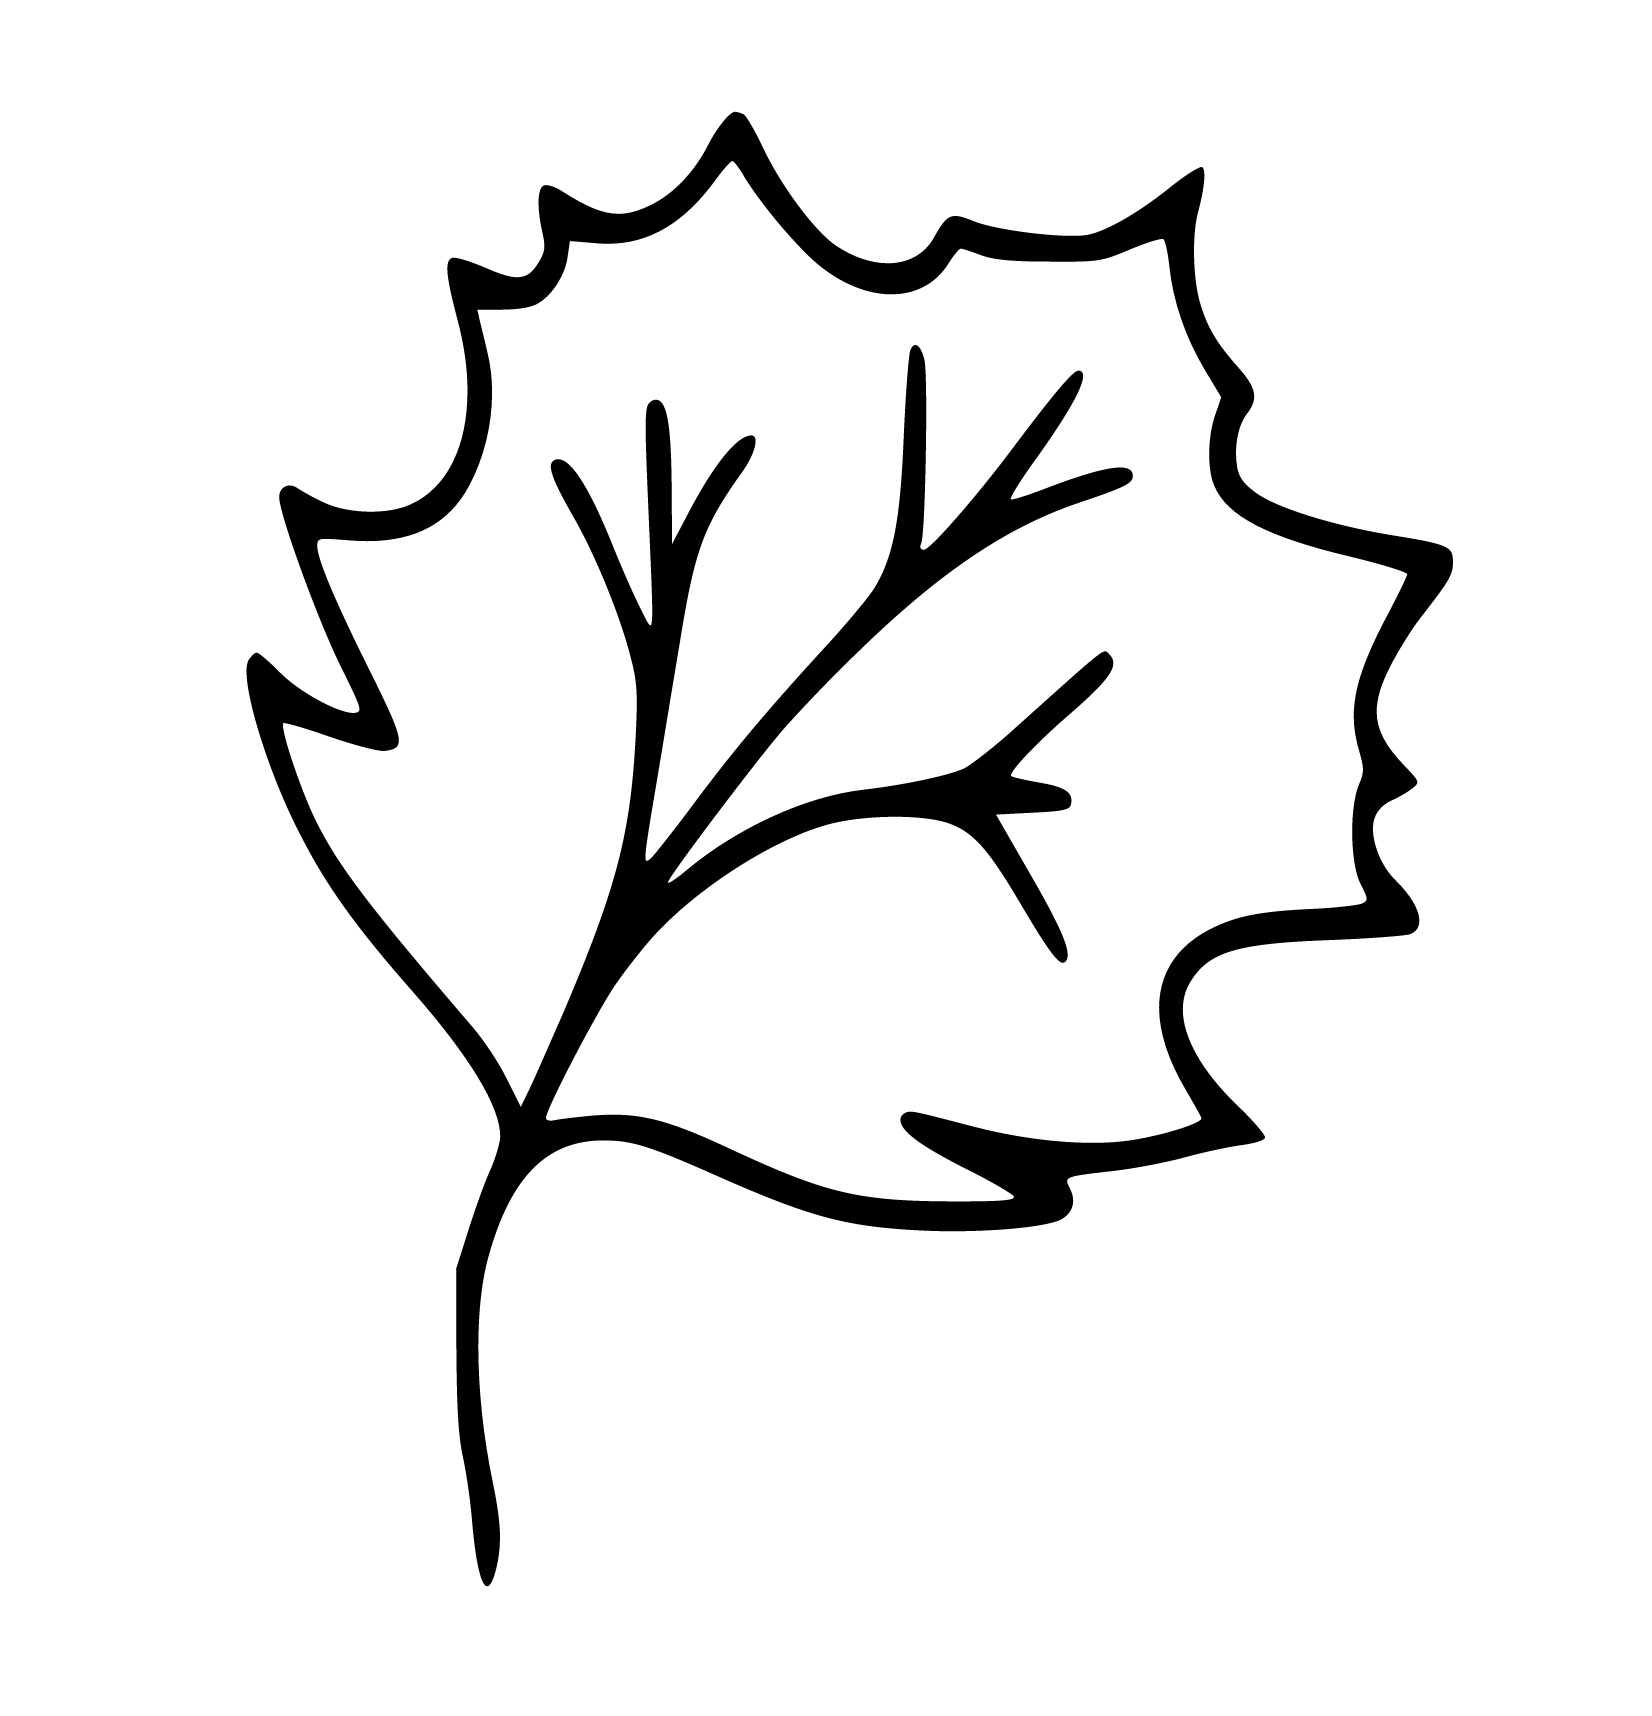 Printable Maple Leaf Coloring Page for kids.